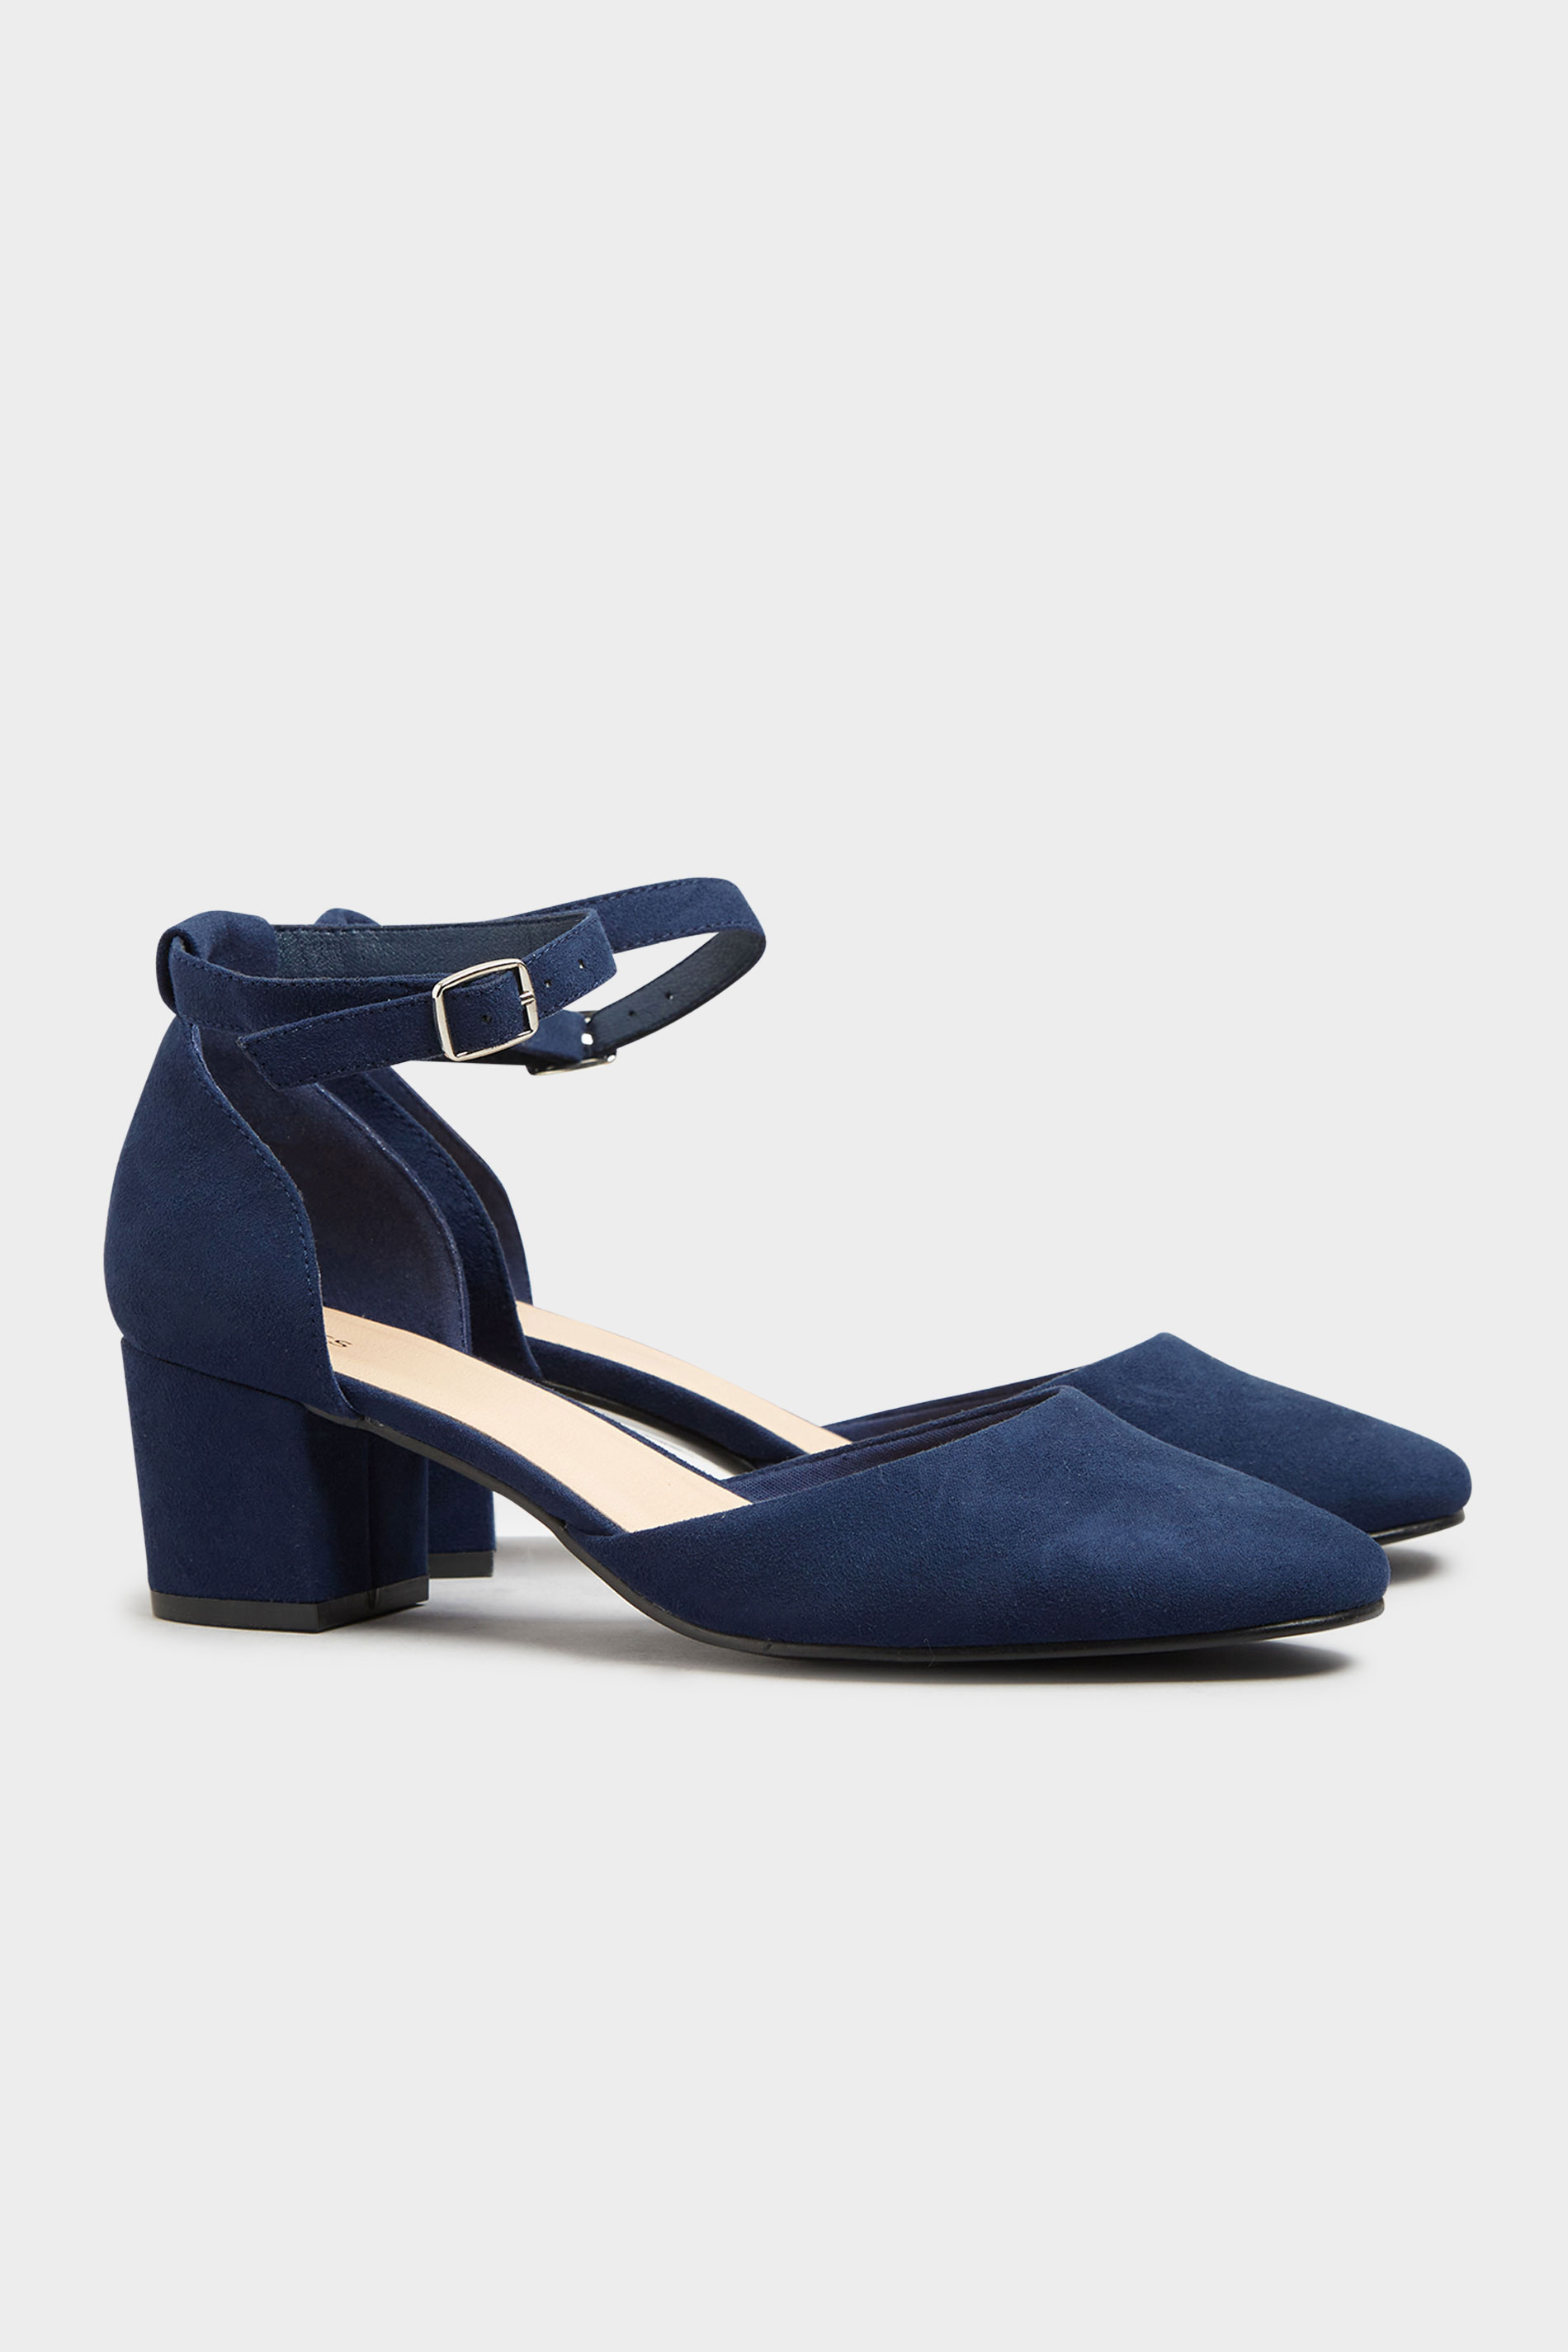 LTS Navy Blue Block Heel Court Shoes In Standard Fit | Long Tall Sally 2